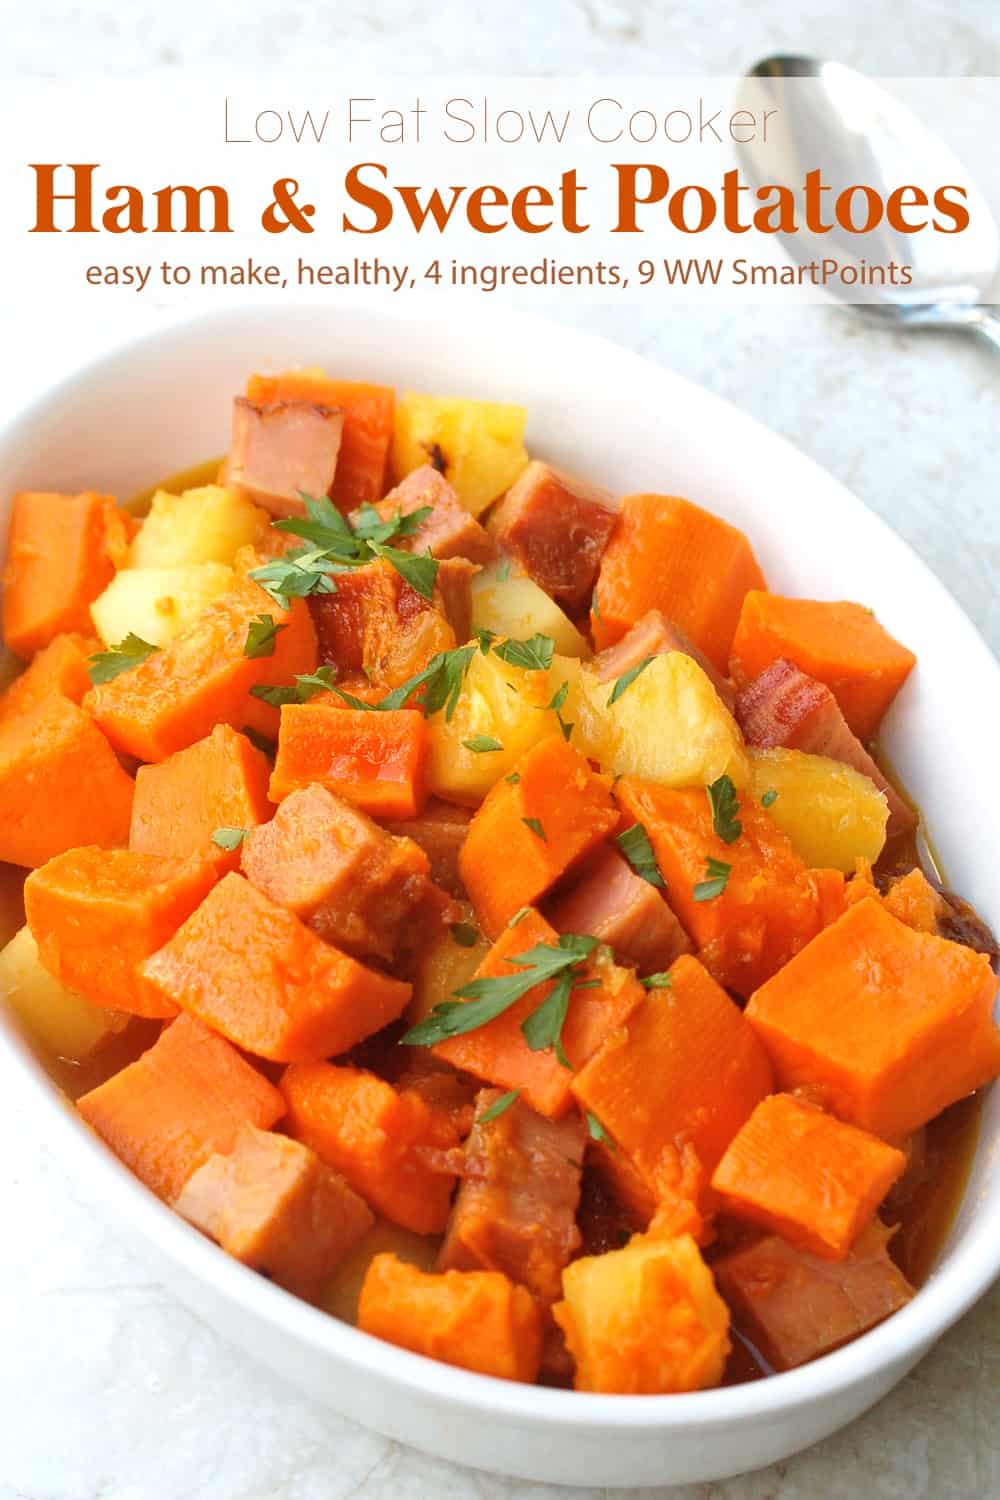 Cubed ham, sweet potatoes and pineapple in white casserole dish with serving spoon